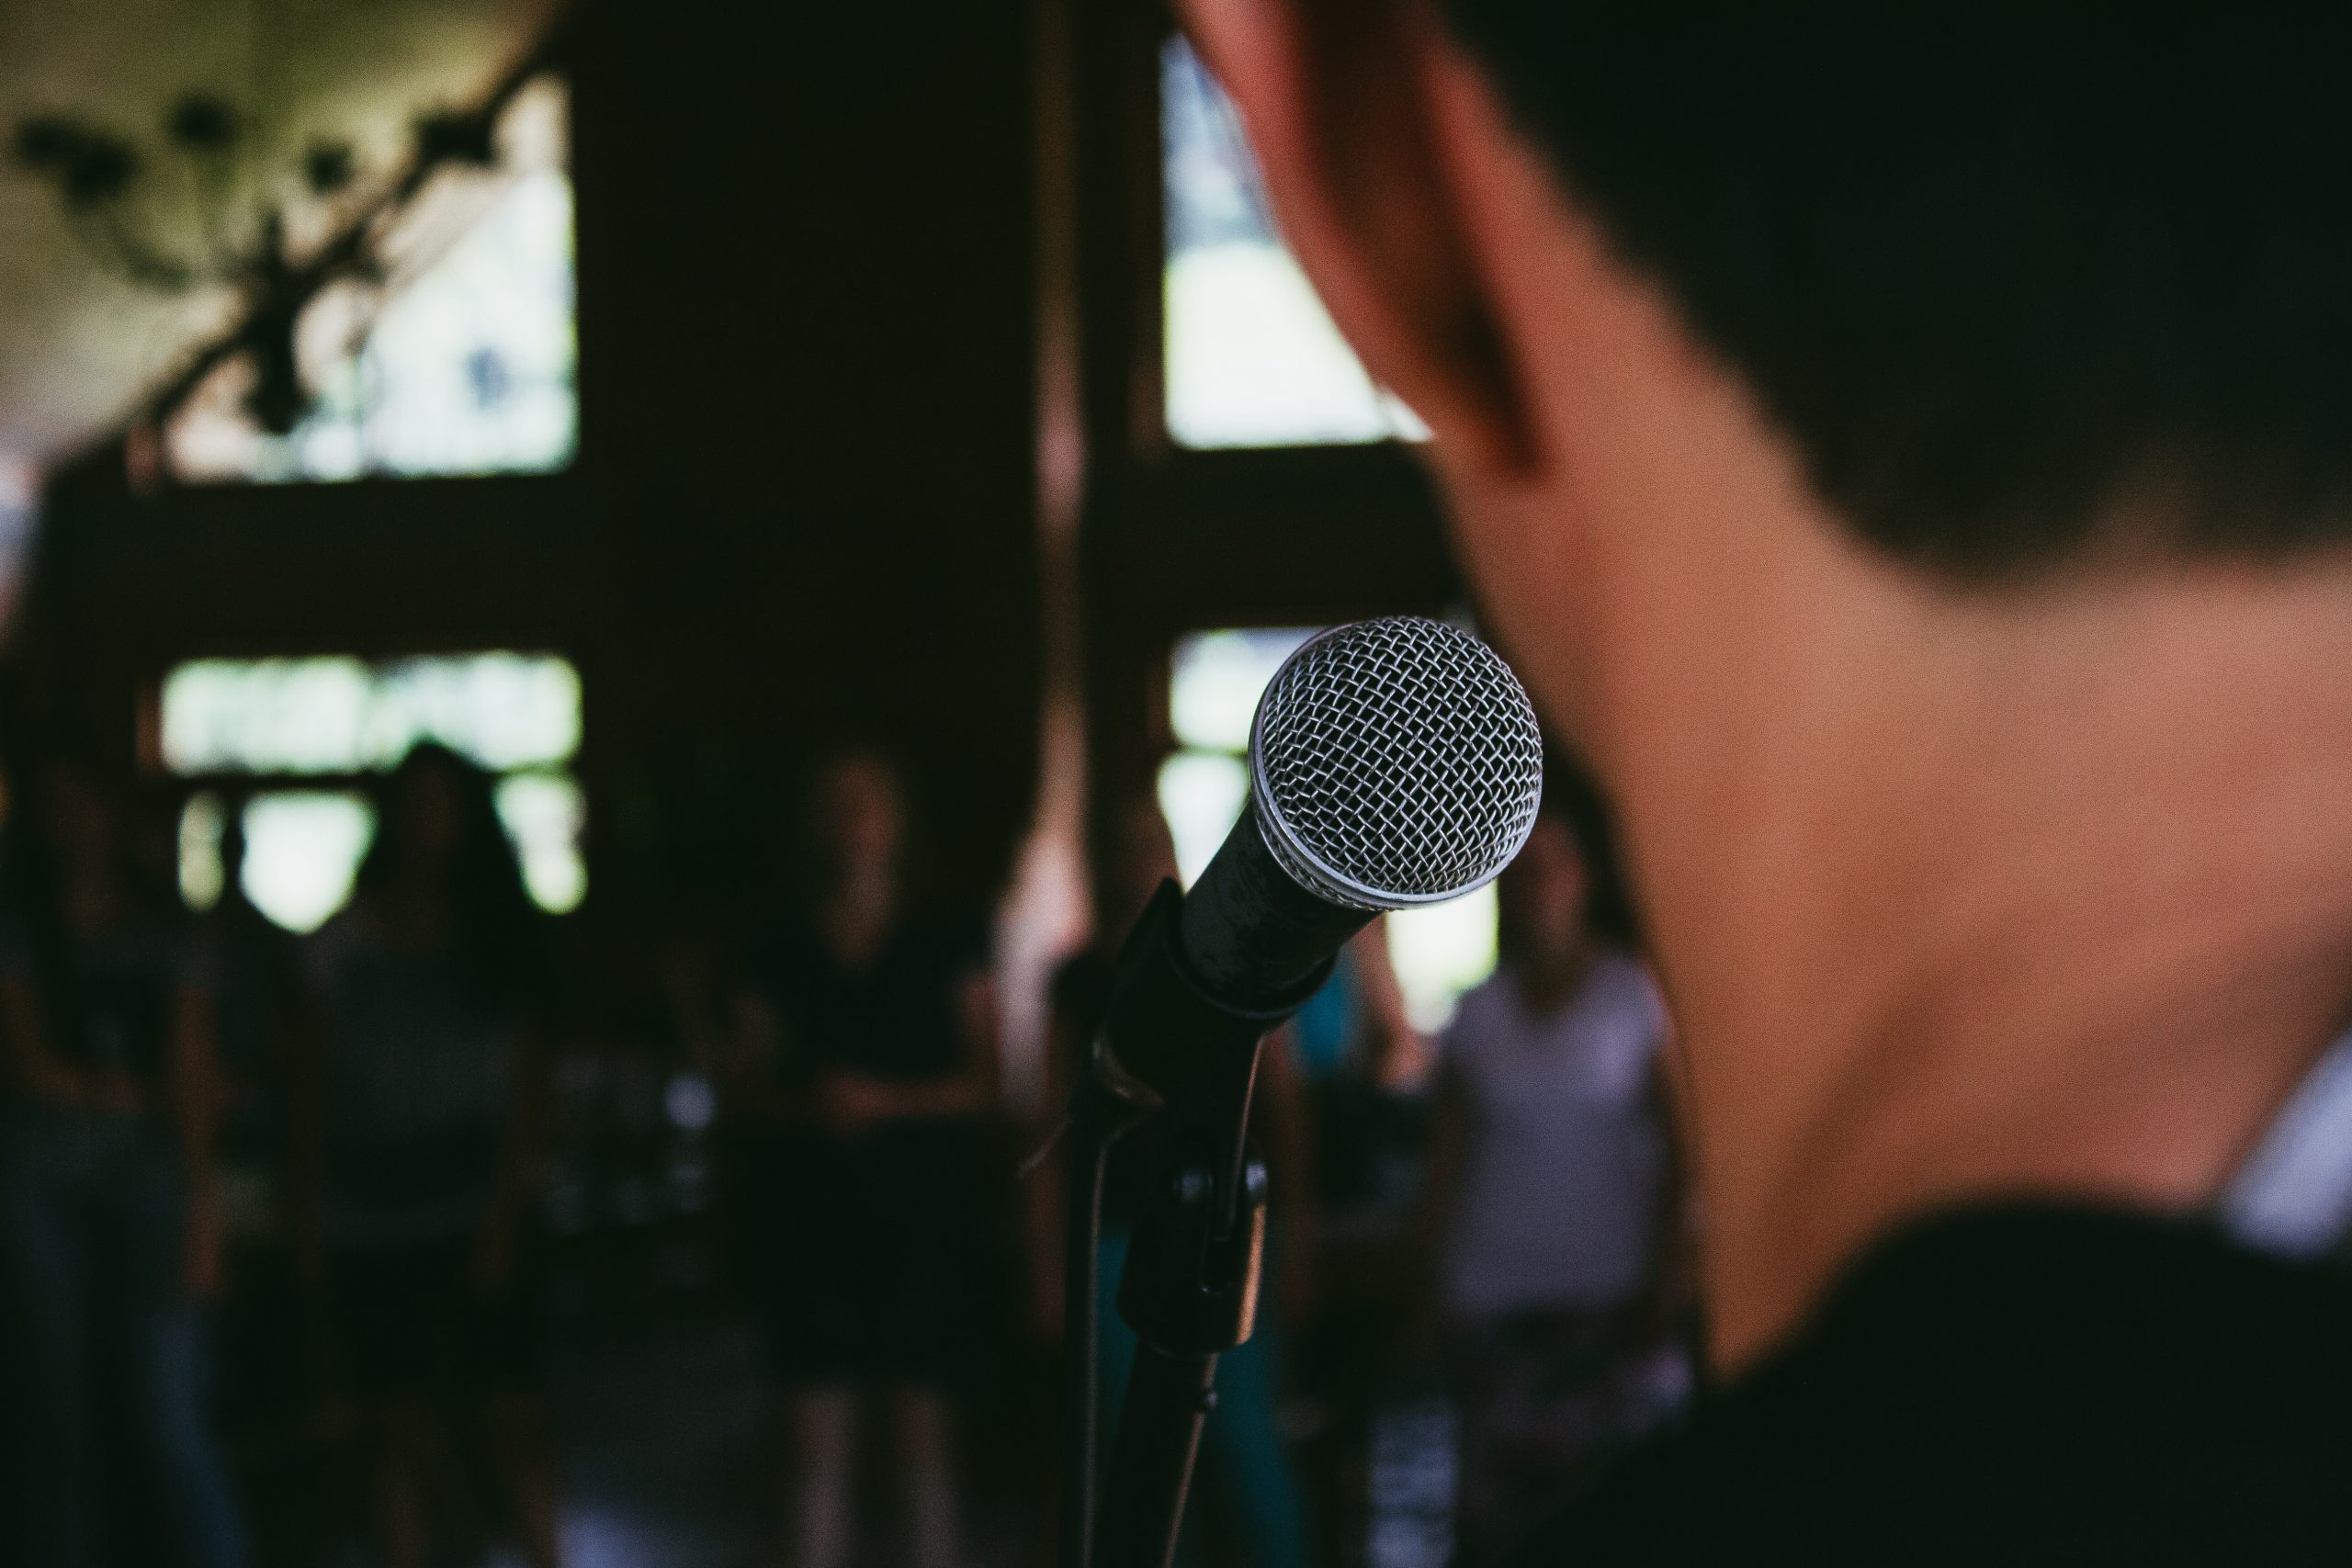 Developing confidence in public speaking